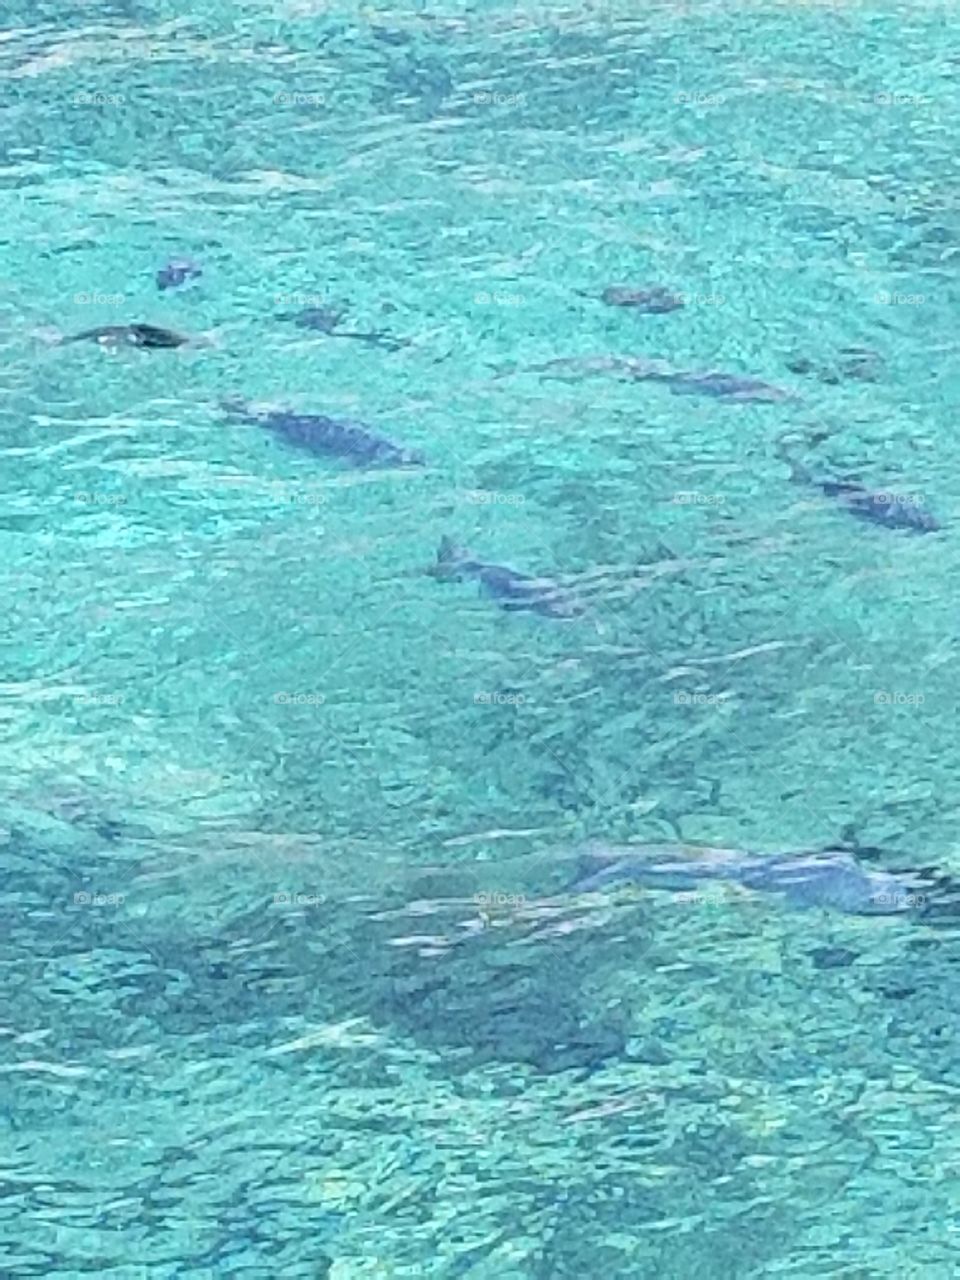 Clear blue Caribbean water with fish